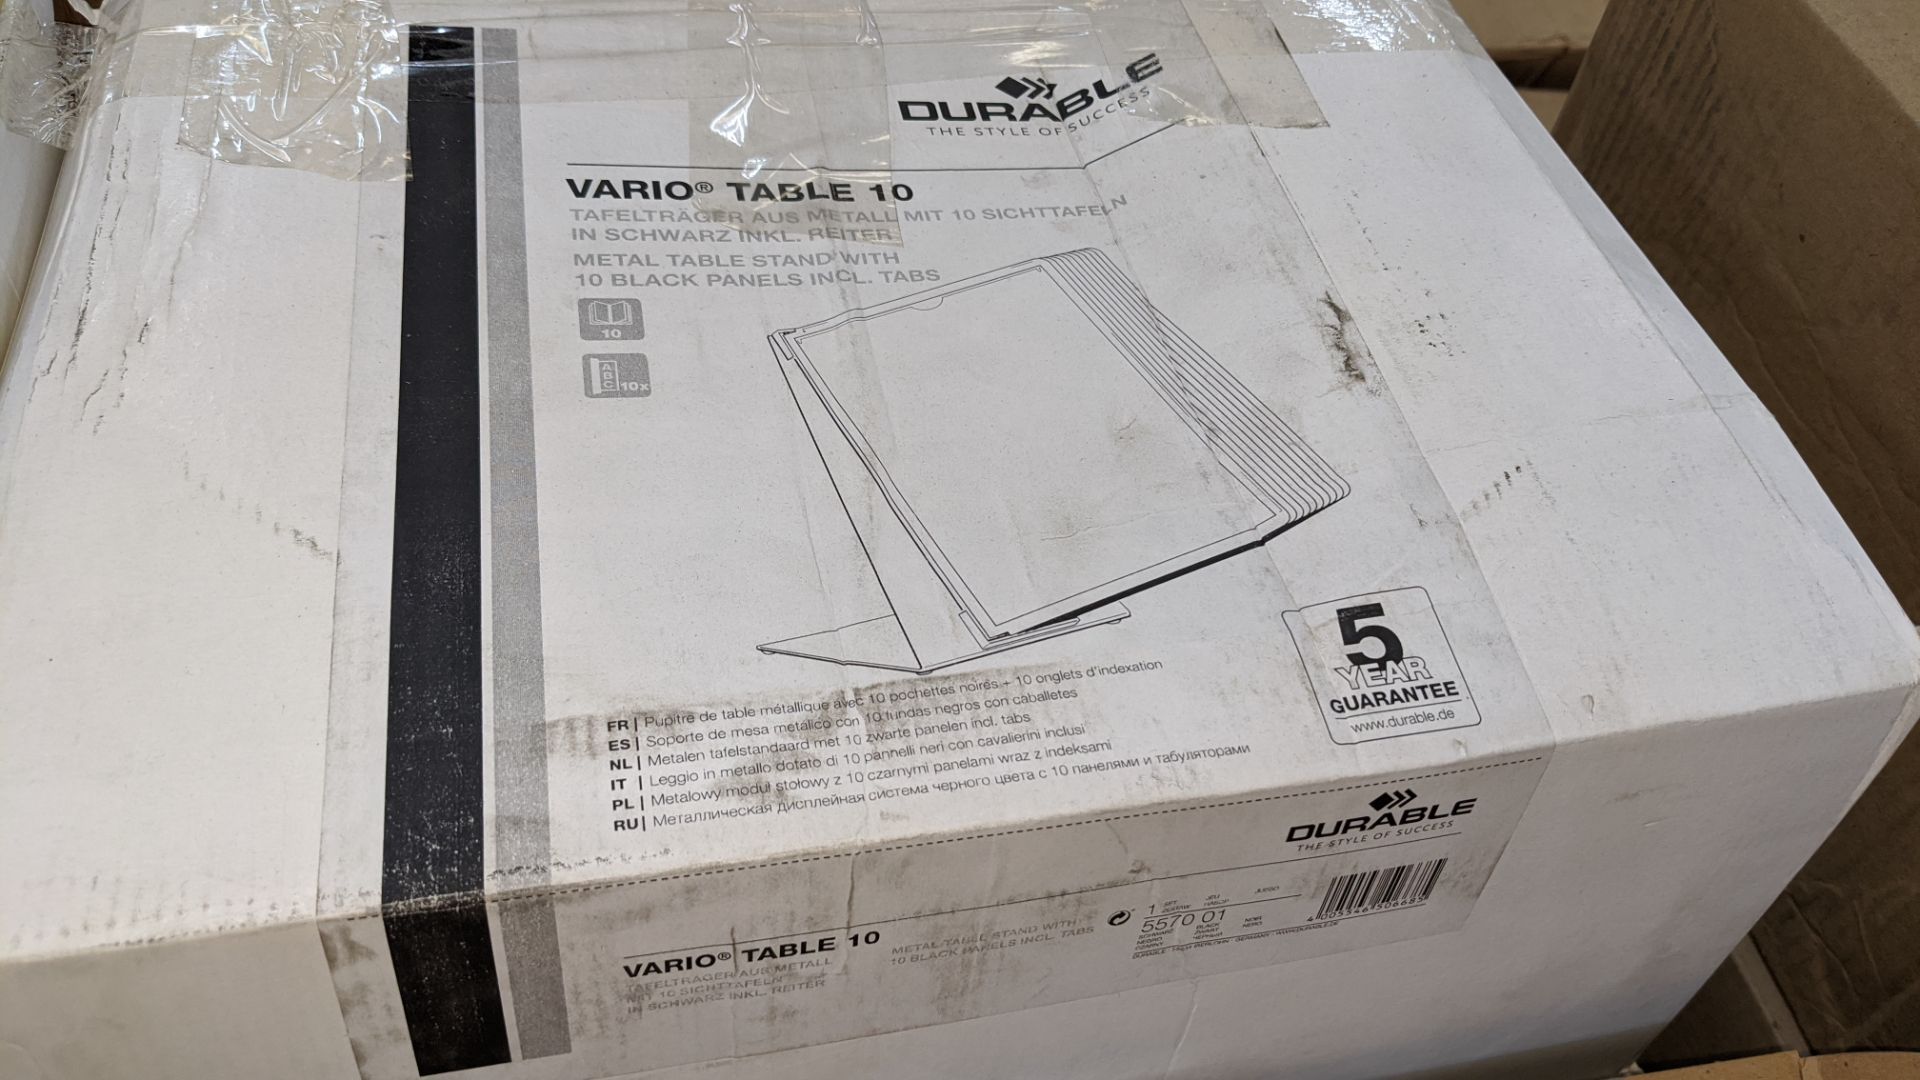 10 off Durable Vario Table 10 metal table stands each including 10 black panels & tabs for same - Image 4 of 5